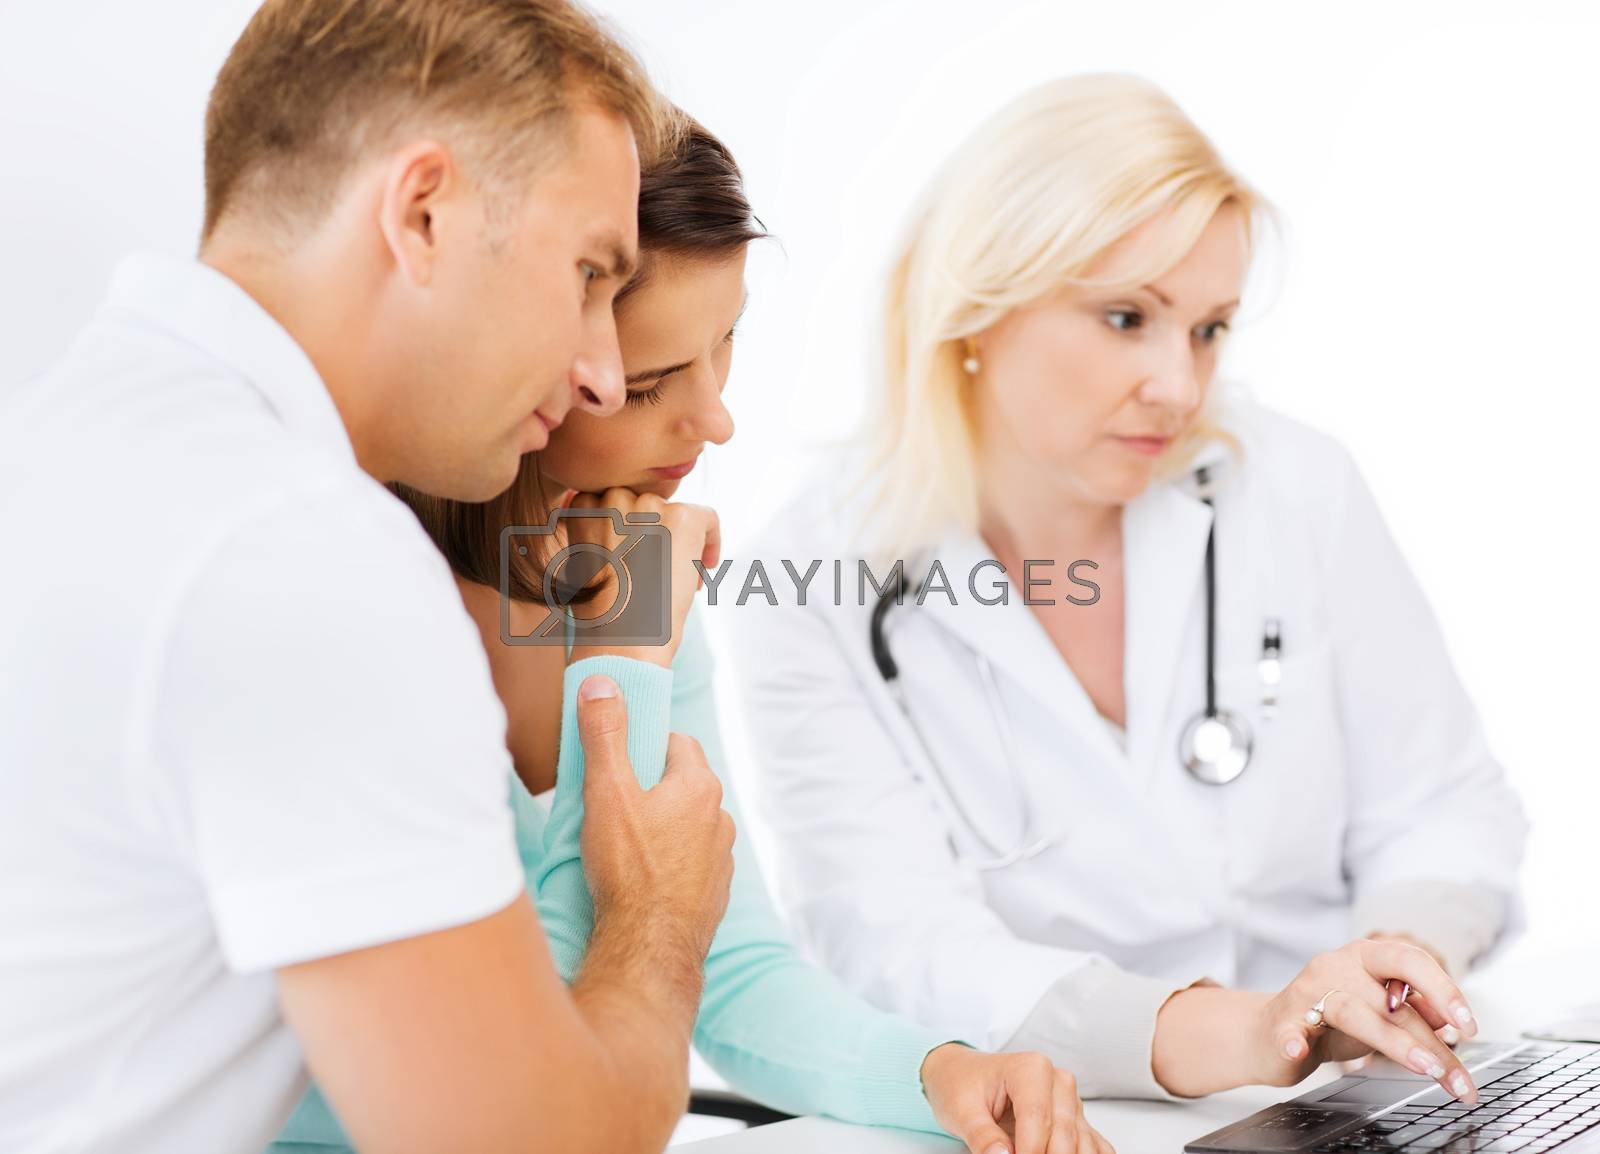 Royalty free image of doctor with patients in hospital by dolgachov